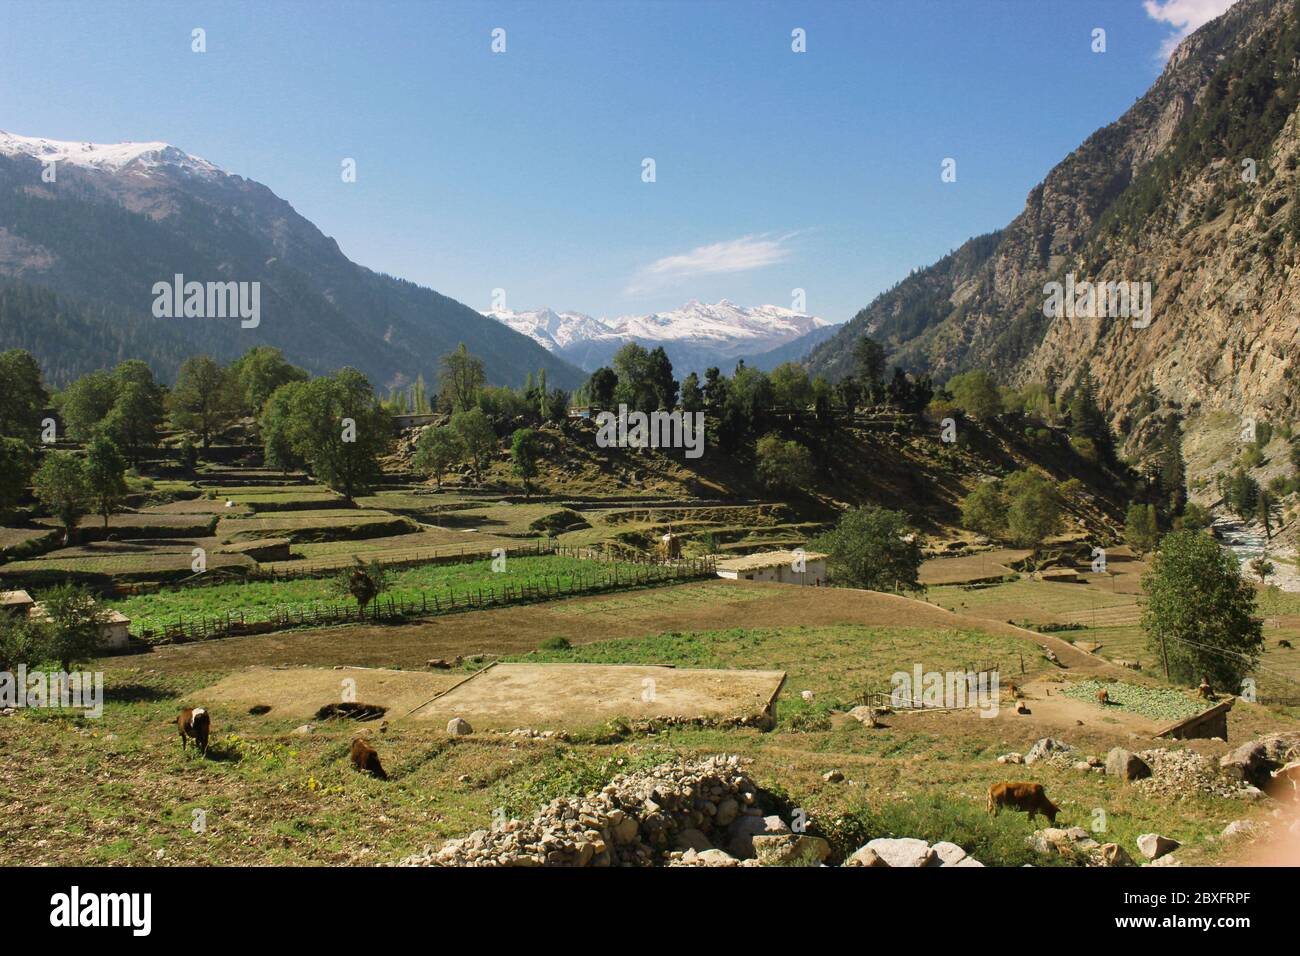 Beautiful village in the mountains with blue skys, pure green fields and trees in swat valley kpk Pakistan Stock Photo